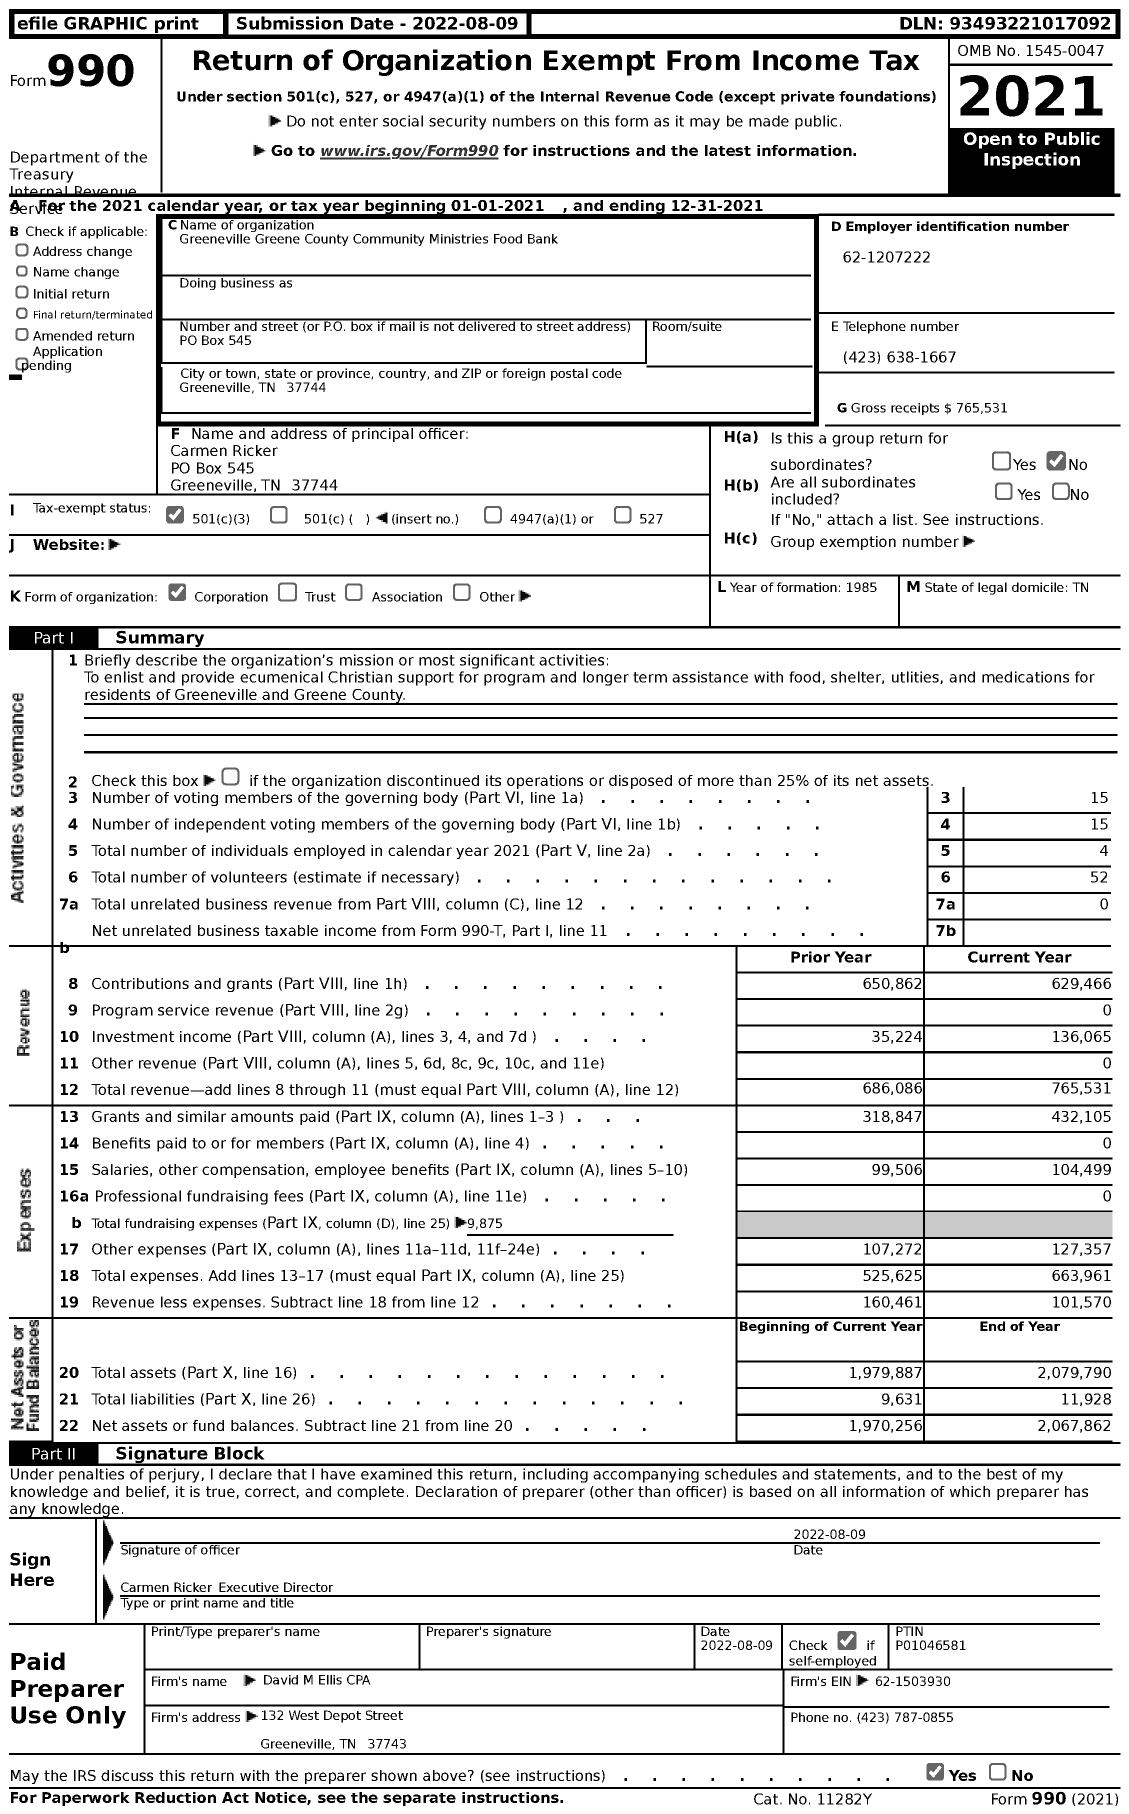 Image of first page of 2021 Form 990 for Greeneville Greene County Community Ministries Food Bank